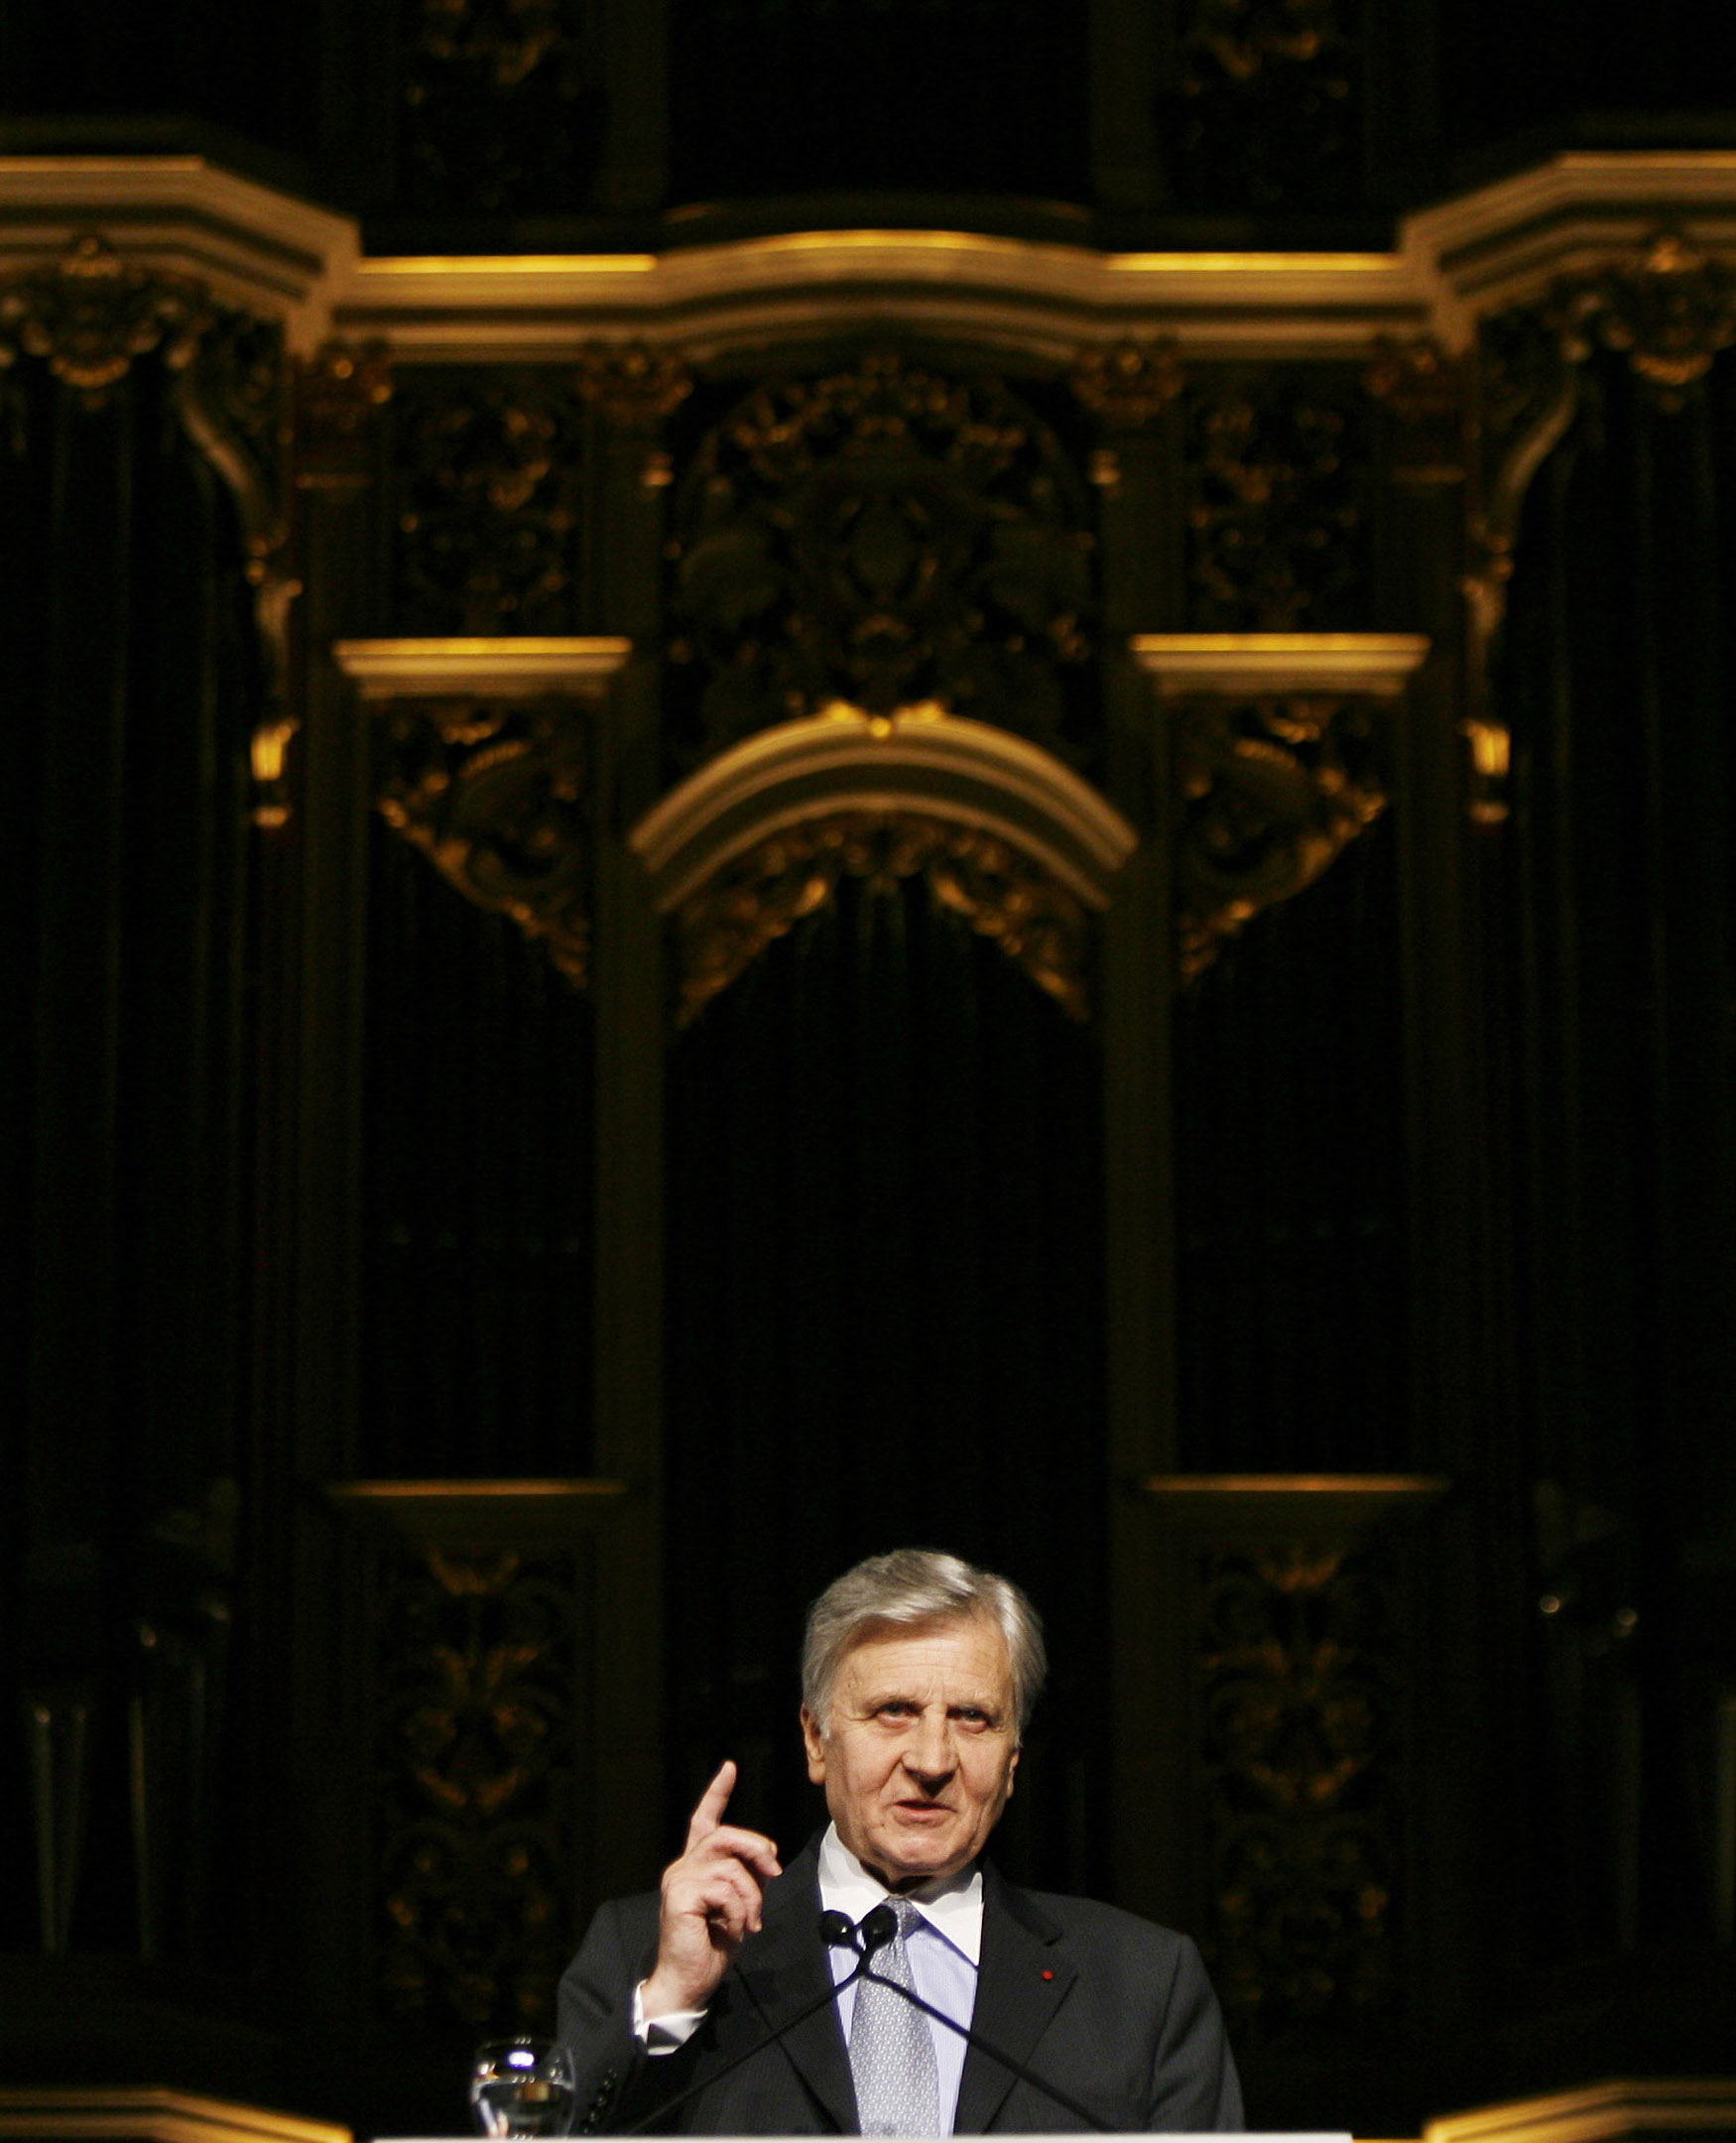 Address by Jean-Claude Trichet, President of the European Central Bank